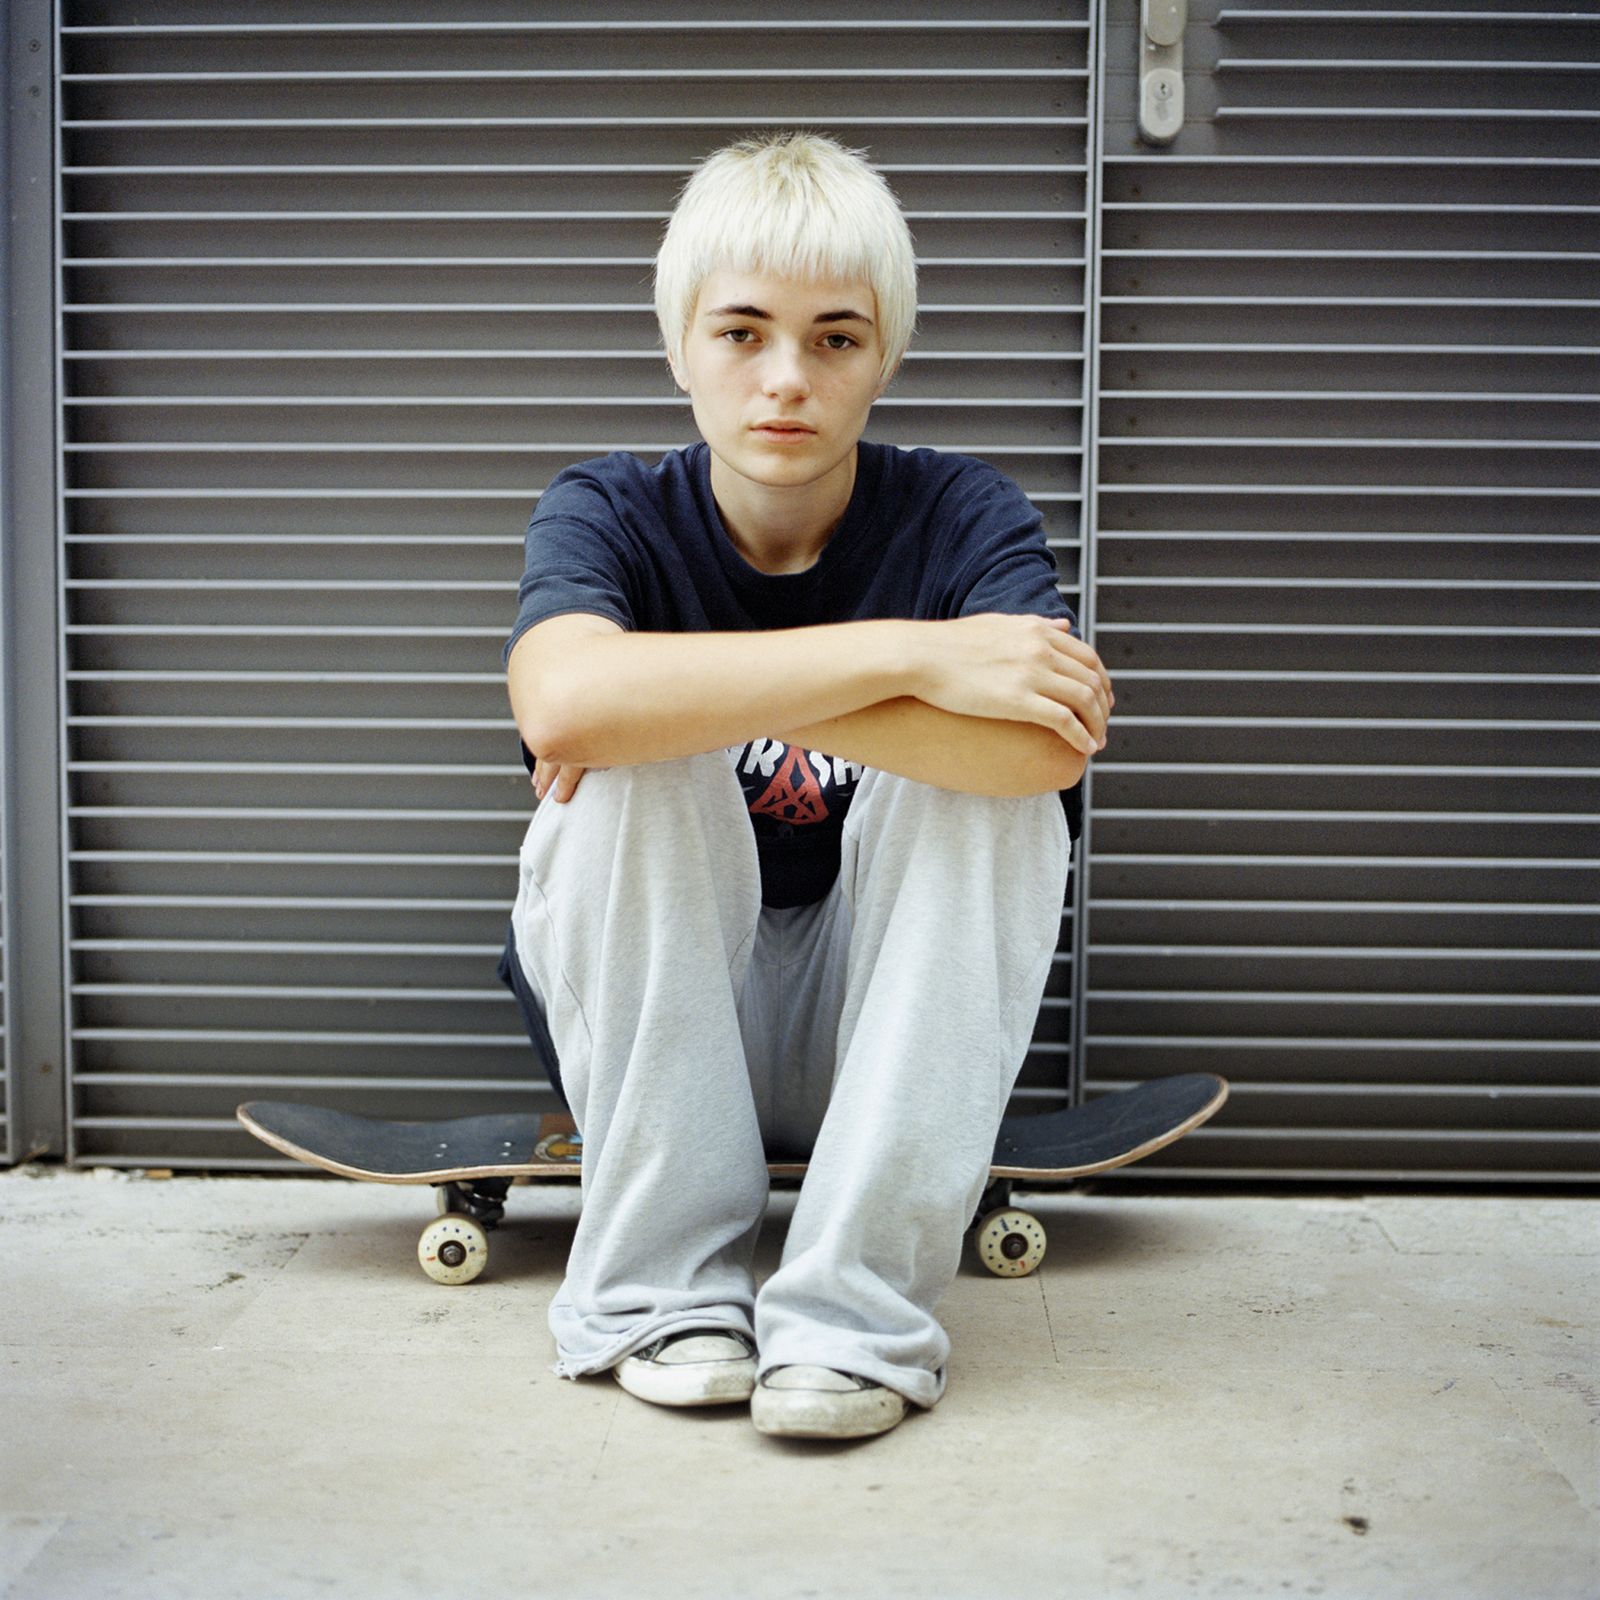 © Chiara Fossati - Penelope, 17 years old, wants to go on her skateboard every day.